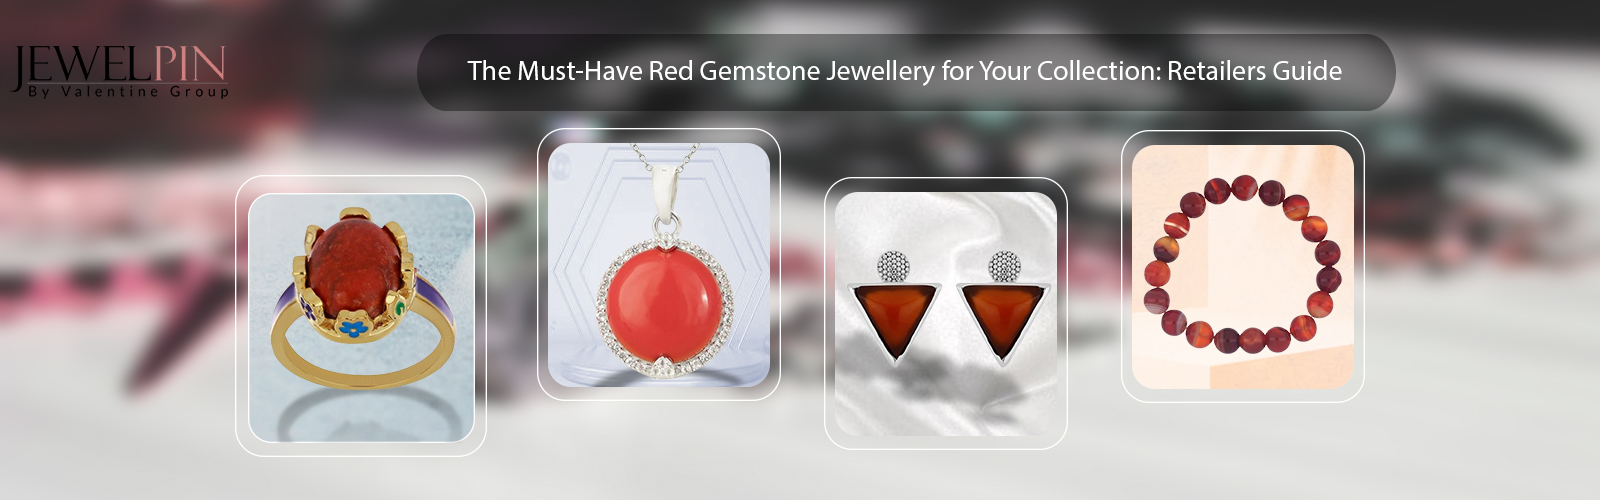 red gemstone jewellery for your collection retailers guide